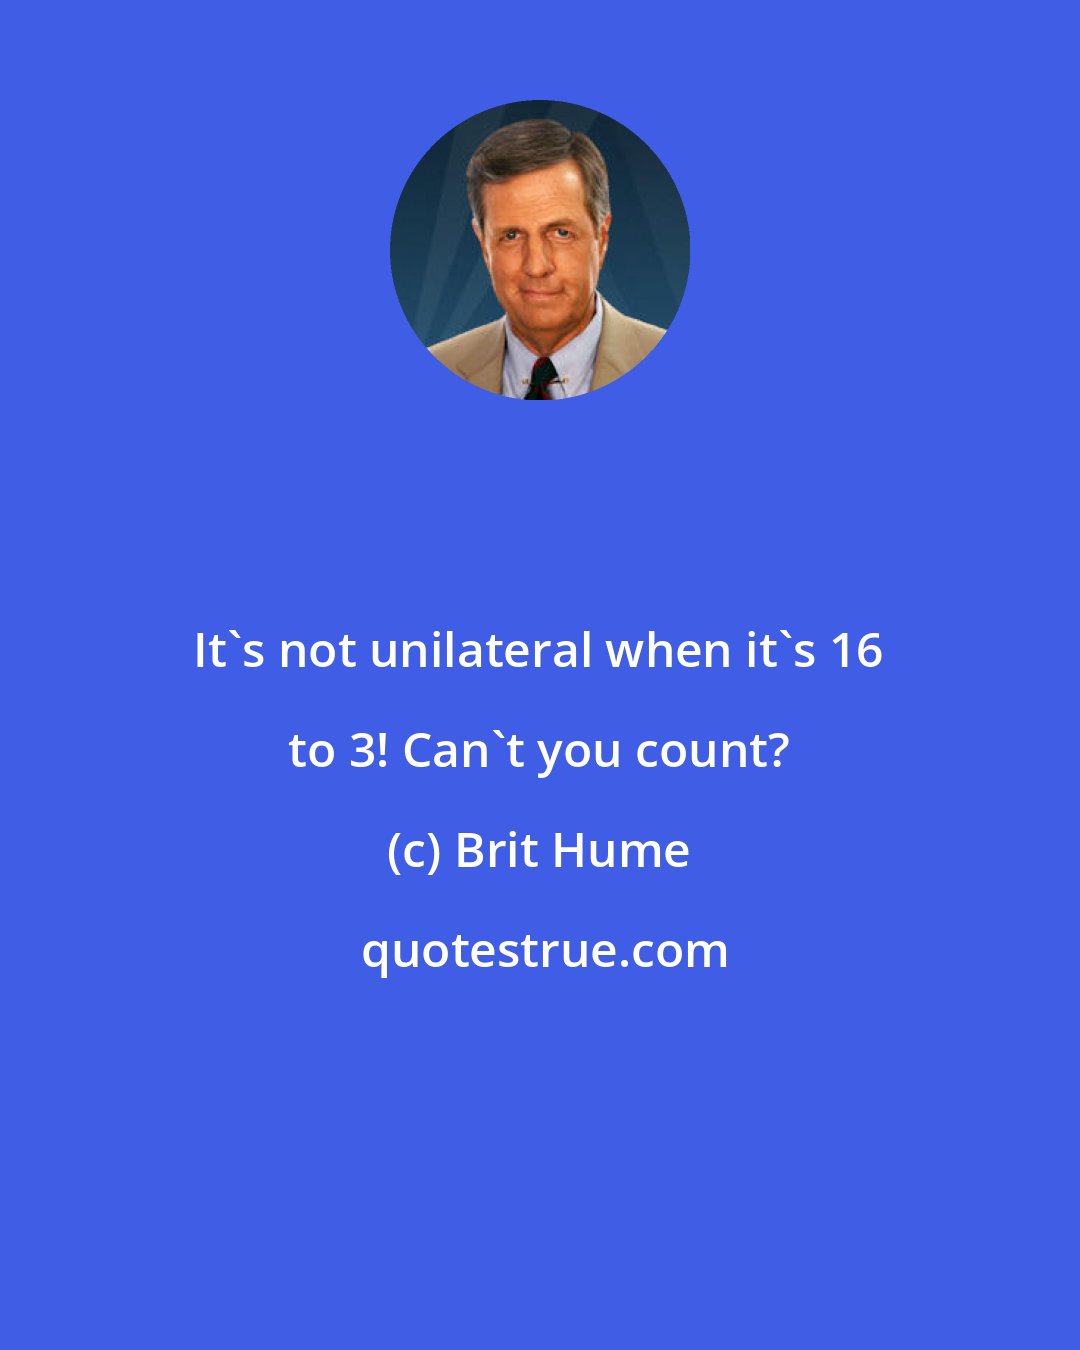 Brit Hume: It's not unilateral when it's 16 to 3! Can't you count?